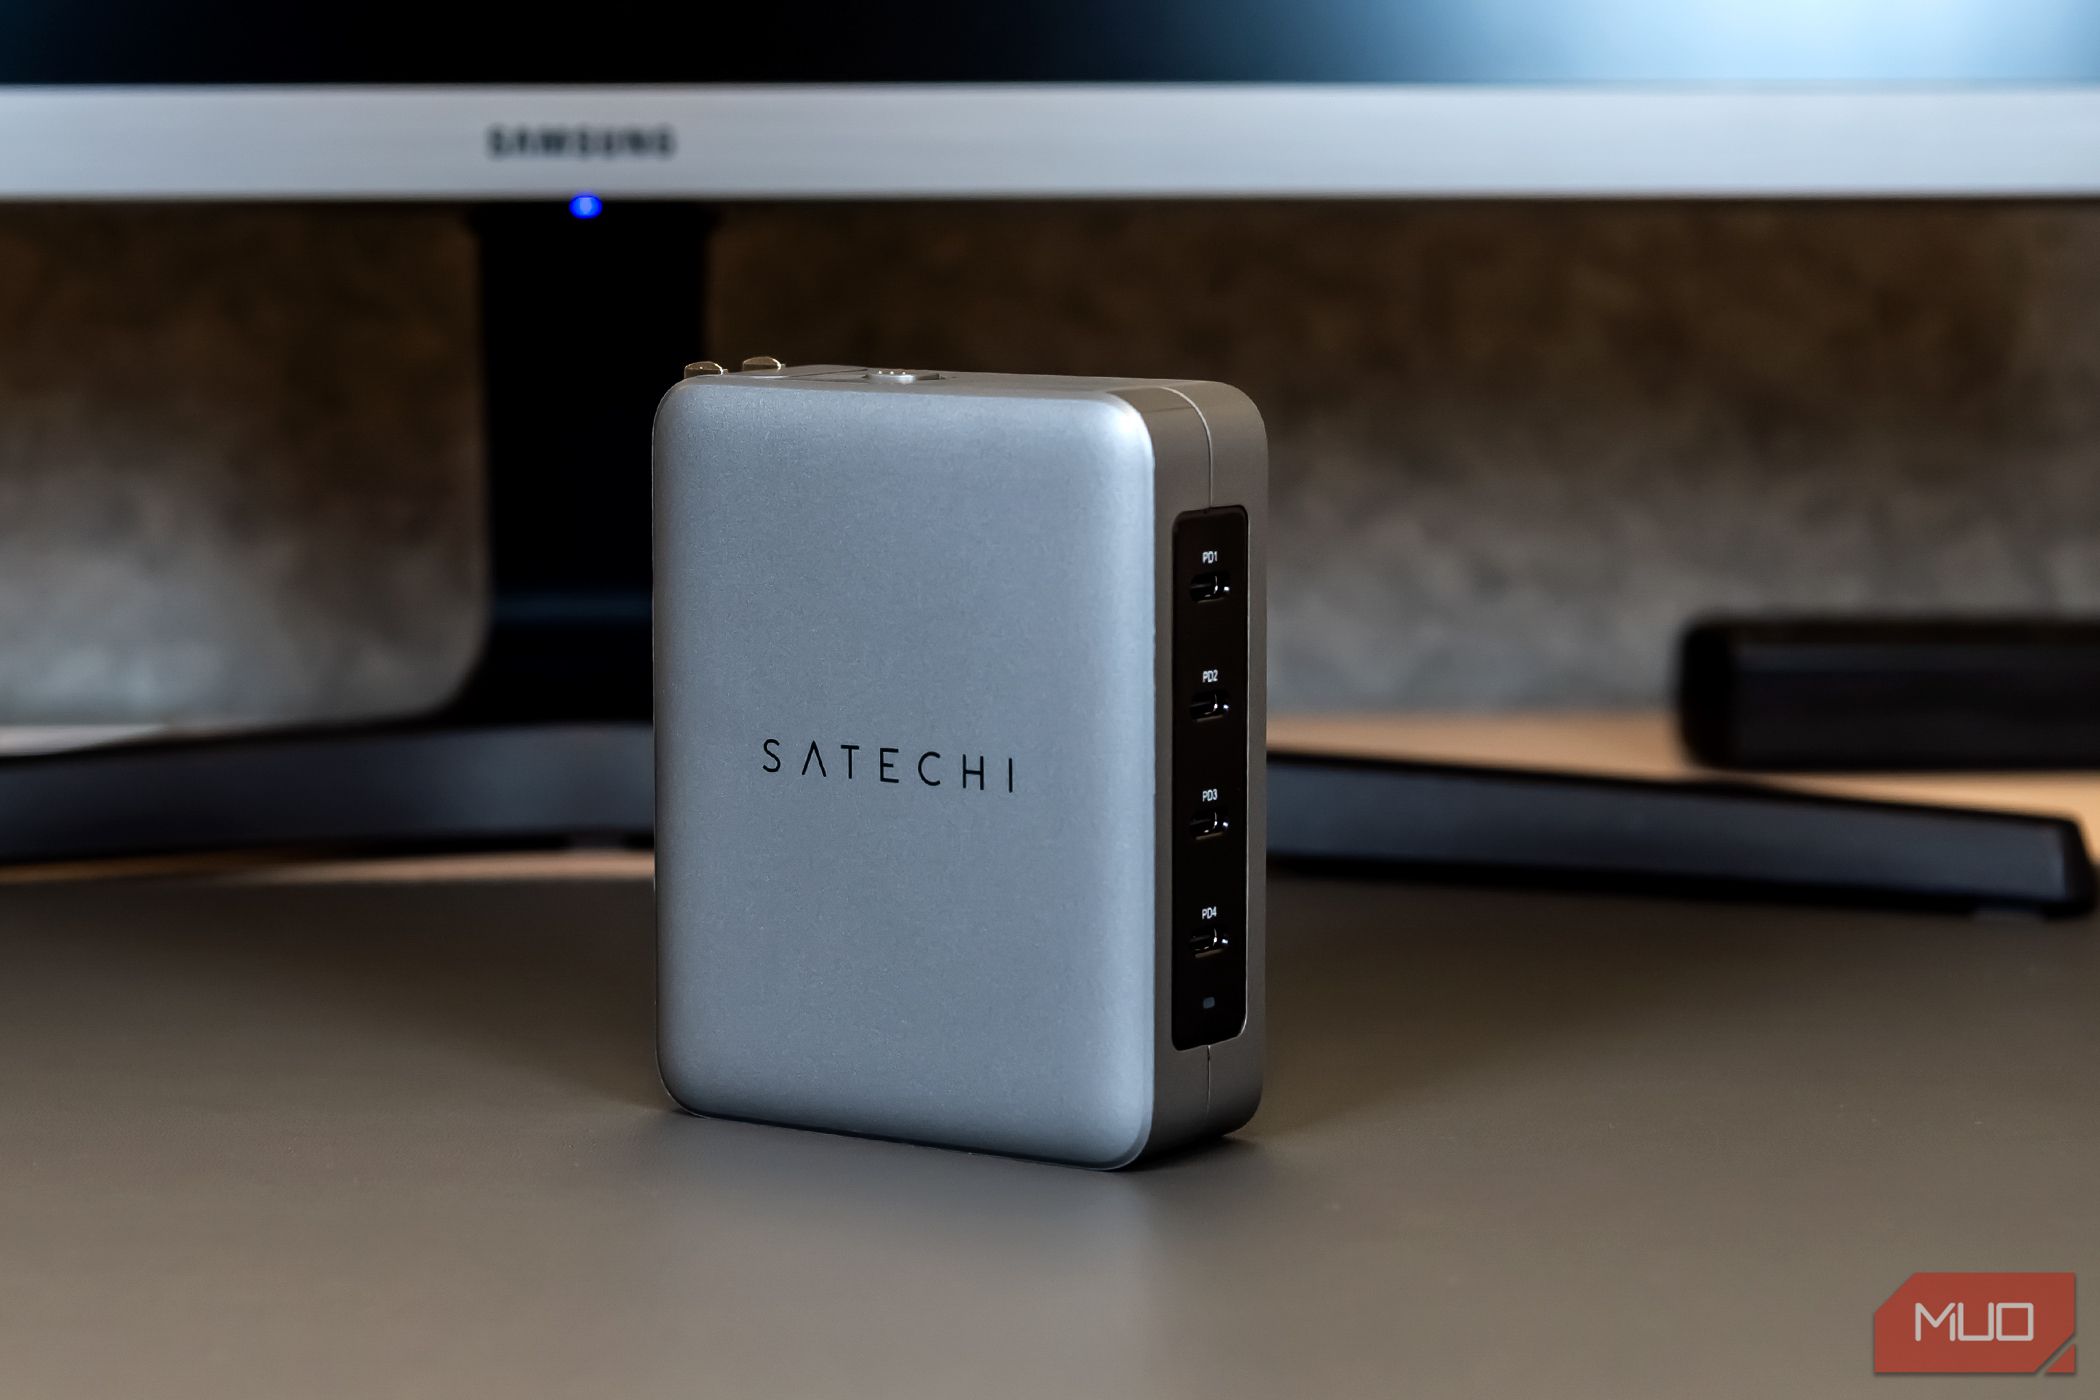 Satechi Travel Charger on desk